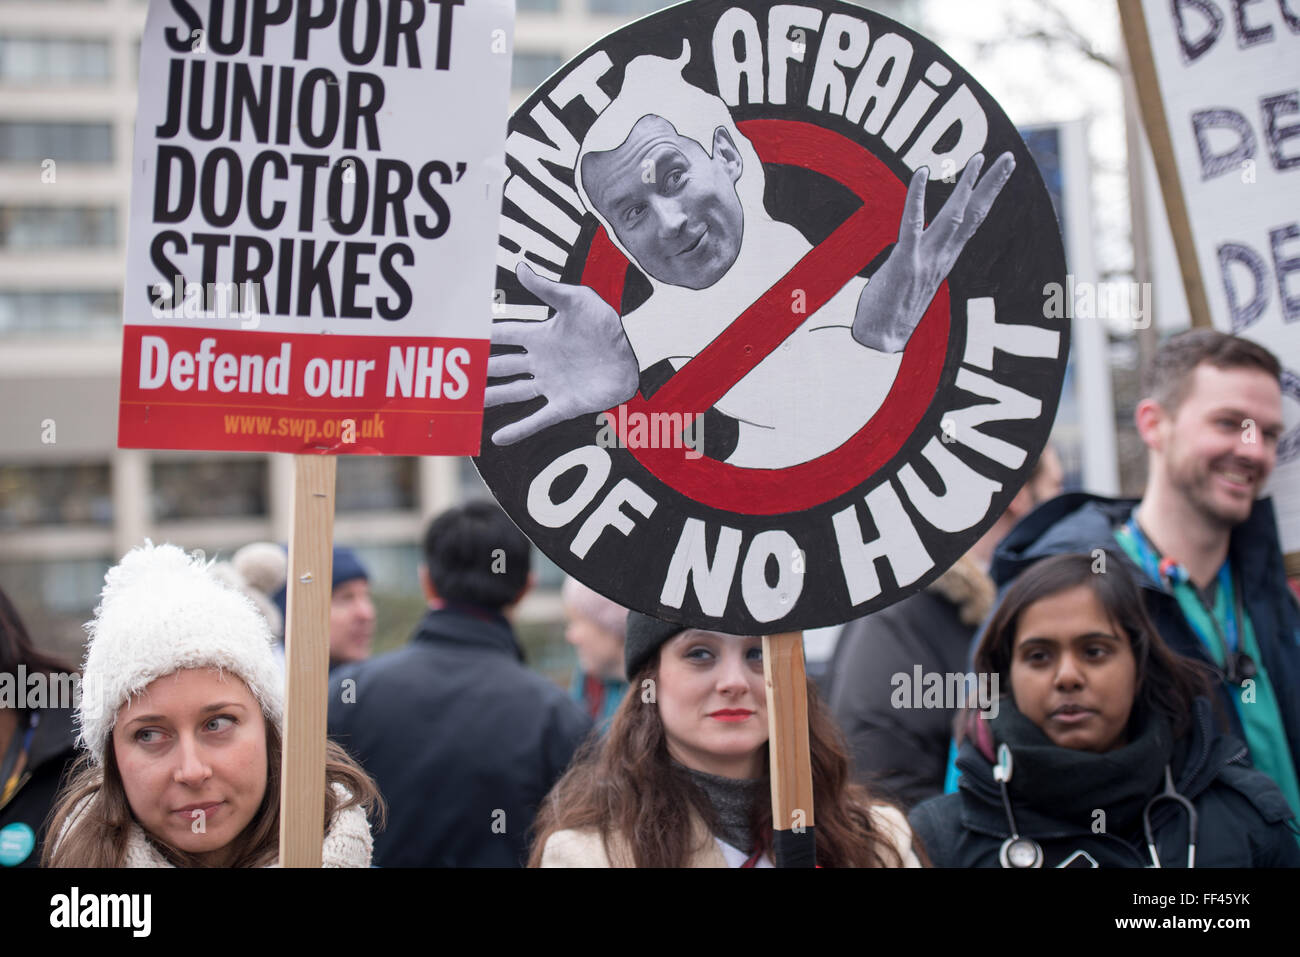 London, UK. 10th February, 2016. Junior doctors on the picket line with banners © Ian Davidson/Alamy Live News Credit:  Ian Davidson/Alamy Live News Stock Photo